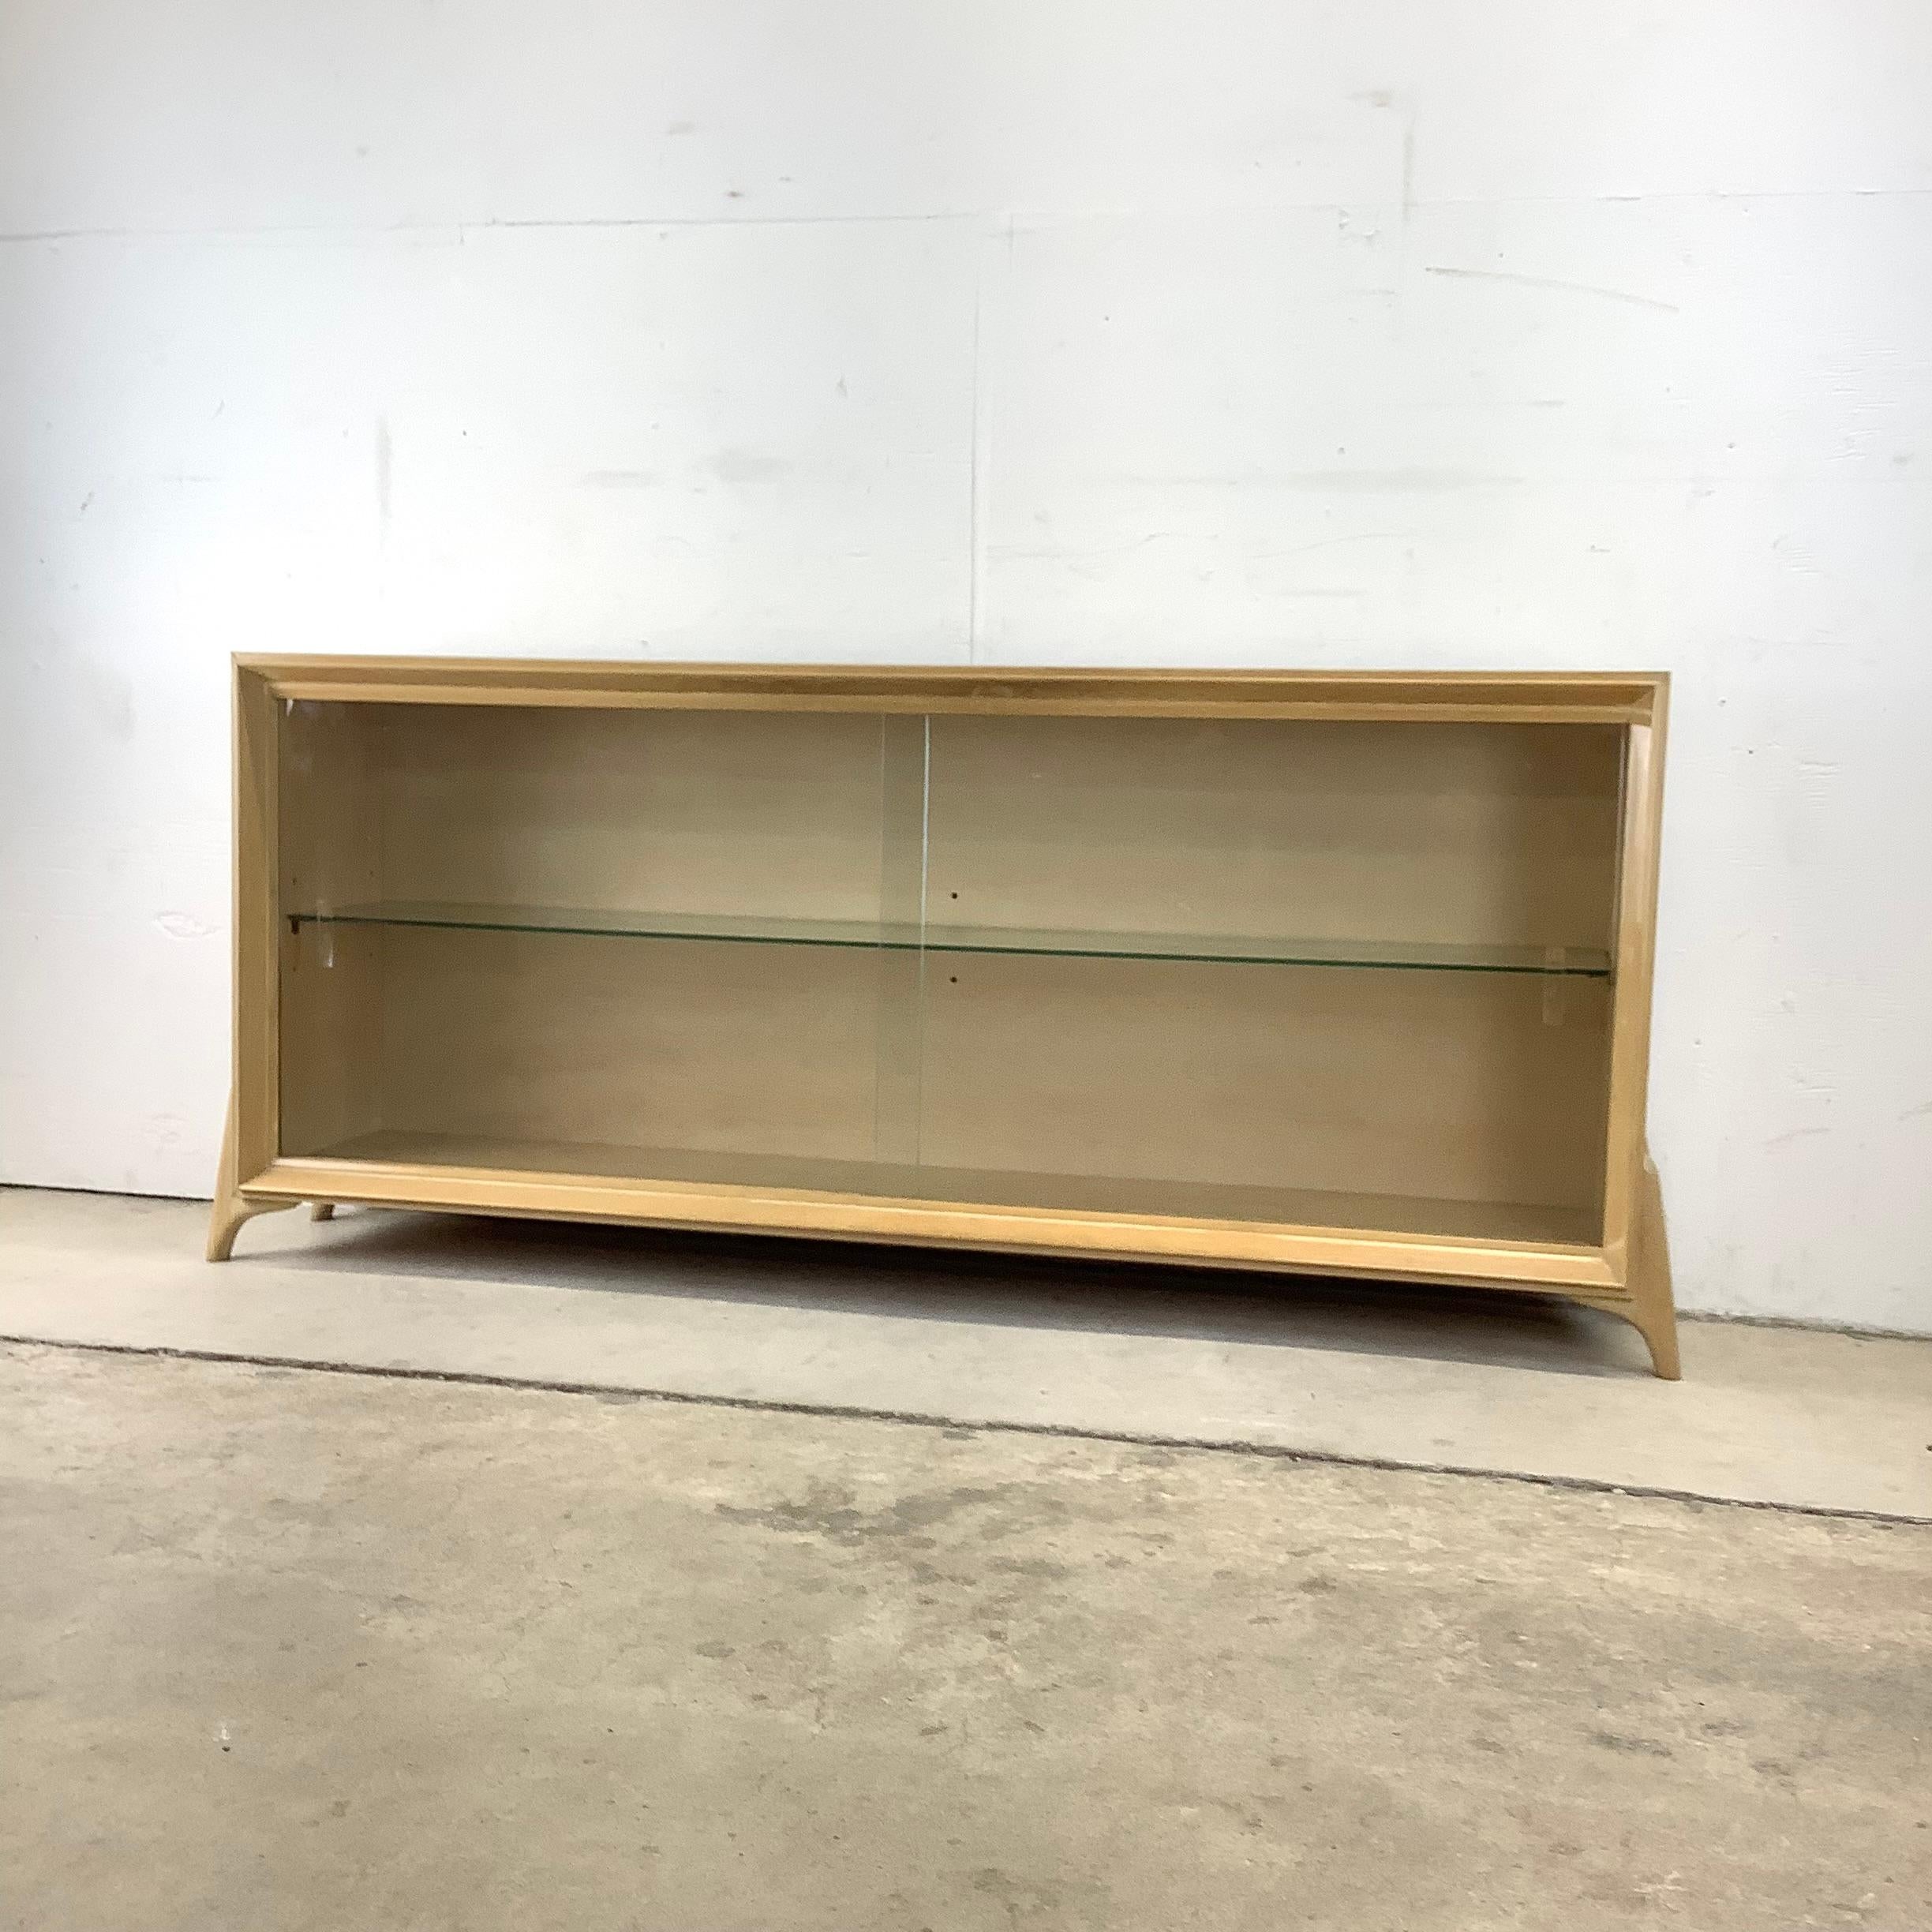 This uniquely sized mid-century bookcase features sturdy vintage blonde wood construction with lacquer finish and adjustable glass shelf. Sliding glass doors add to the display case quality of this low bookcase while the clean modern lines and